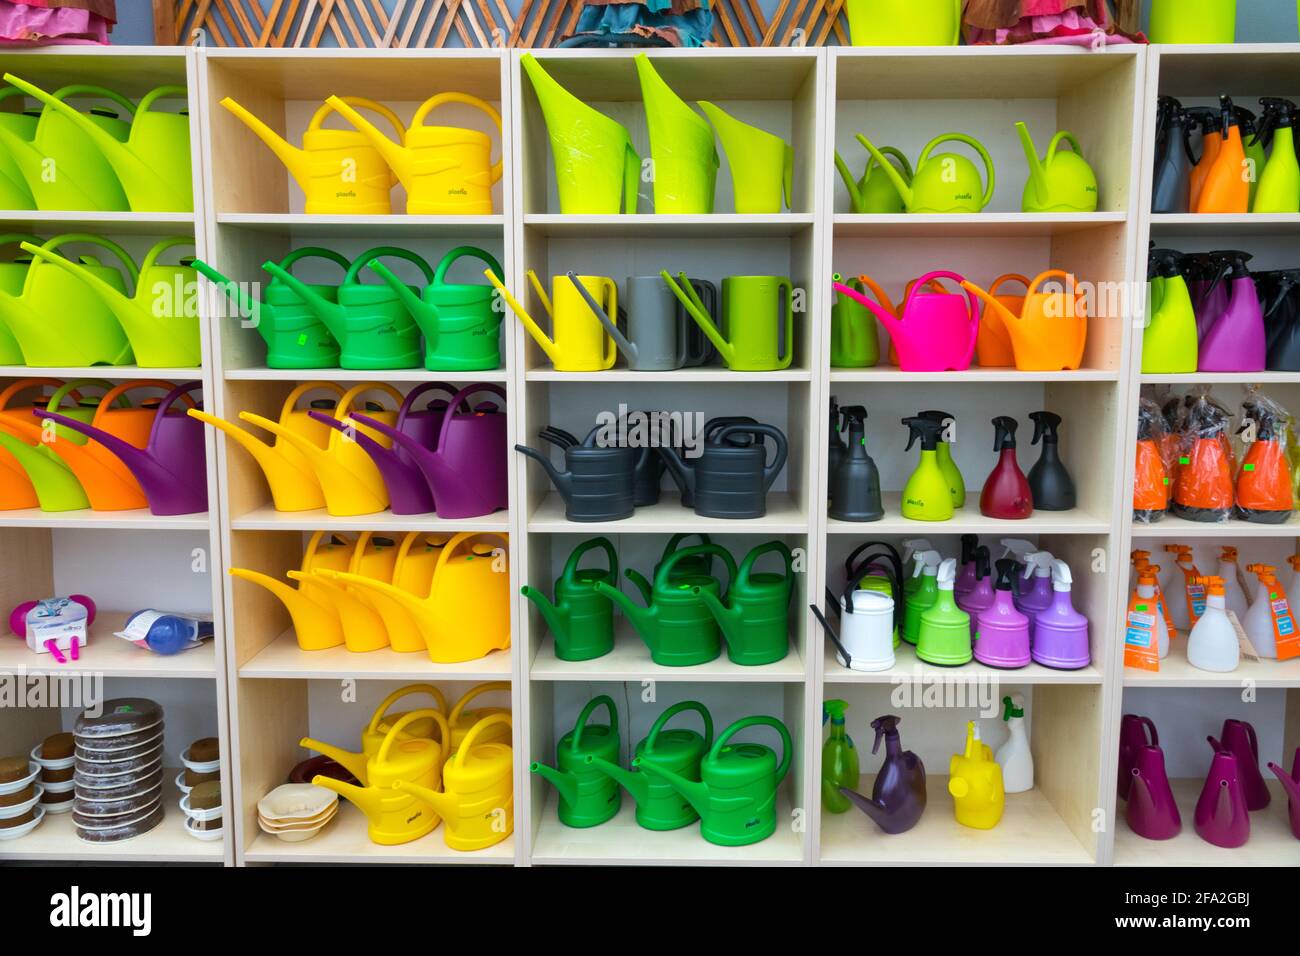 Colorful watering cans on display in shelves, garden centre Stock Photo